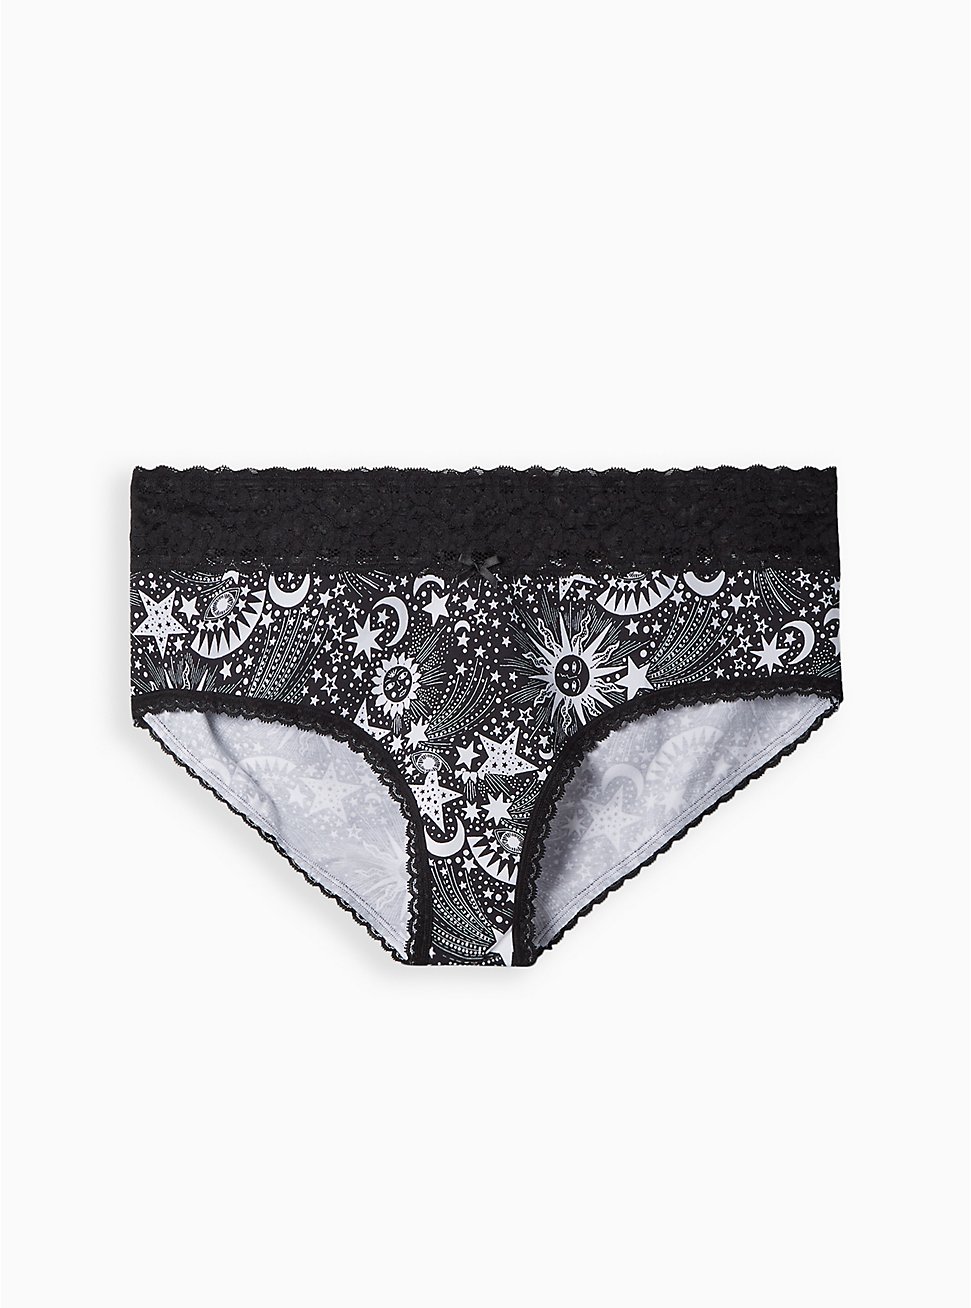 Cotton Mid-Rise Cheeky Lace Trim Panty, HEART OF GOLD BLACK, hi-res